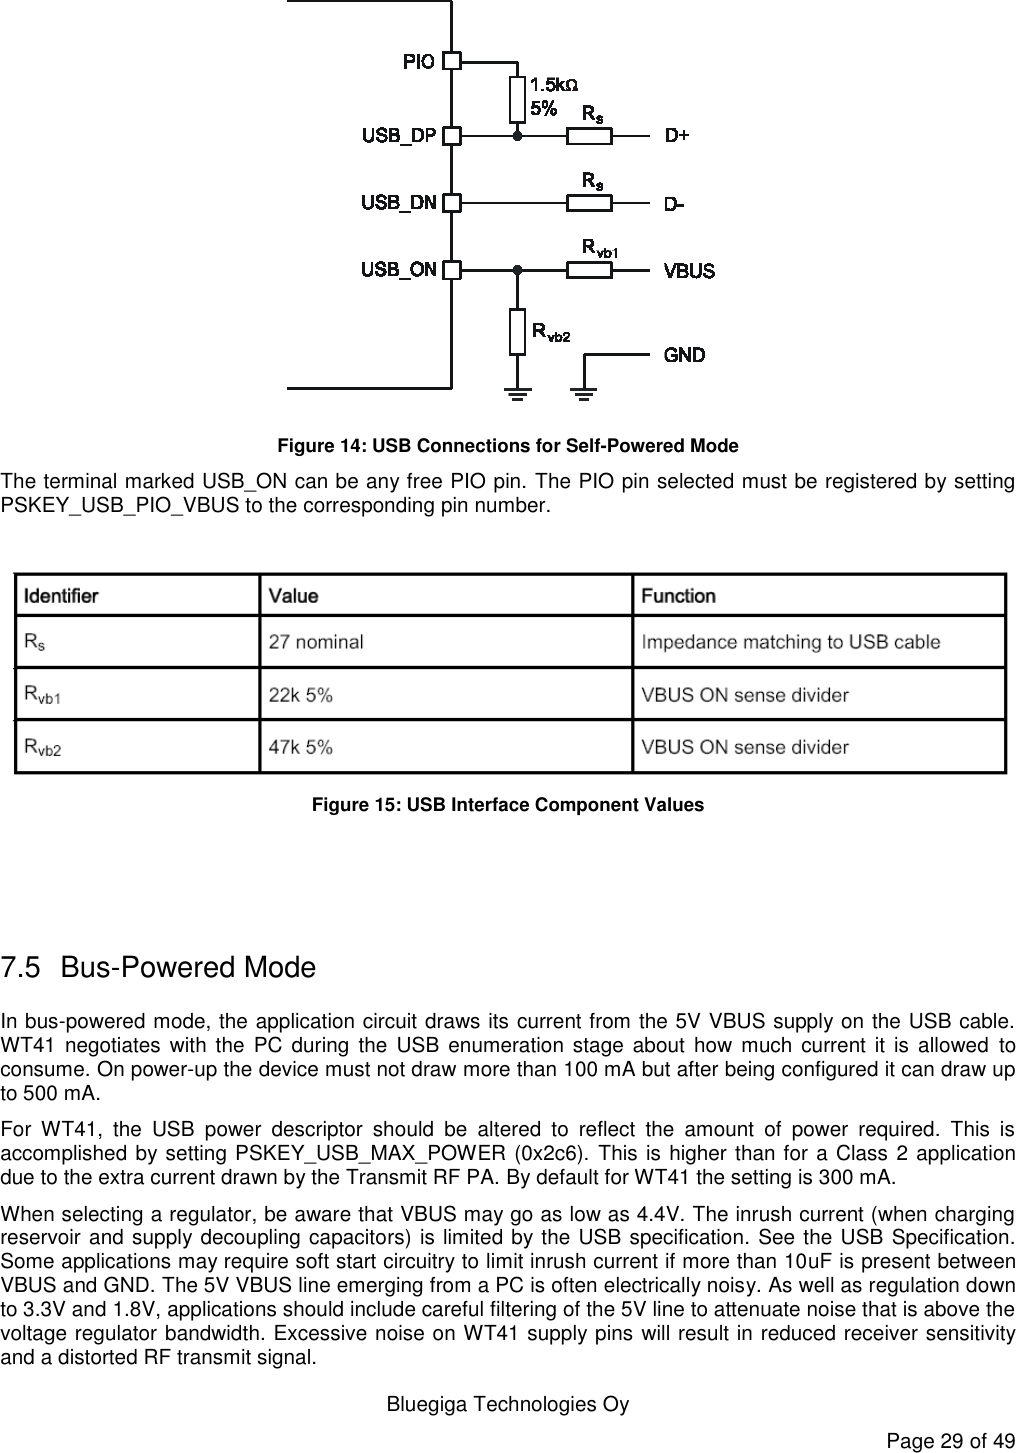   Bluegiga Technologies Oy Page 29 of 49  Figure 14: USB Connections for Self-Powered Mode The terminal marked USB_ON can be any free PIO pin. The PIO pin selected must be registered by setting PSKEY_USB_PIO_VBUS to the corresponding pin number.   Figure 15: USB Interface Component Values    7.5  Bus-Powered Mode In bus-powered mode, the application circuit draws its current from the 5V VBUS supply on the USB cable. WT41 negotiates  with the  PC during  the  USB enumeration  stage  about  how  much  current it  is  allowed  to consume. On power-up the device must not draw more than 100 mA but after being configured it can draw up to 500 mA. For  WT41,  the  USB  power  descriptor  should  be  altered  to  reflect  the  amount  of  power  required.  This  is accomplished by setting PSKEY_USB_MAX_POWER (0x2c6). This is higher than for a Class 2 application due to the extra current drawn by the Transmit RF PA. By default for WT41 the setting is 300 mA. When selecting a regulator, be aware that VBUS may go as low as 4.4V. The inrush current (when charging reservoir and supply decoupling capacitors) is limited by the USB specification. See the USB Specification. Some applications may require soft start circuitry to limit inrush current if more than 10uF is present between VBUS and GND. The 5V VBUS line emerging from a PC is often electrically noisy. As well as regulation down to 3.3V and 1.8V, applications should include careful filtering of the 5V line to attenuate noise that is above the voltage regulator bandwidth. Excessive noise on WT41 supply pins will result in reduced receiver sensitivity and a distorted RF transmit signal. 